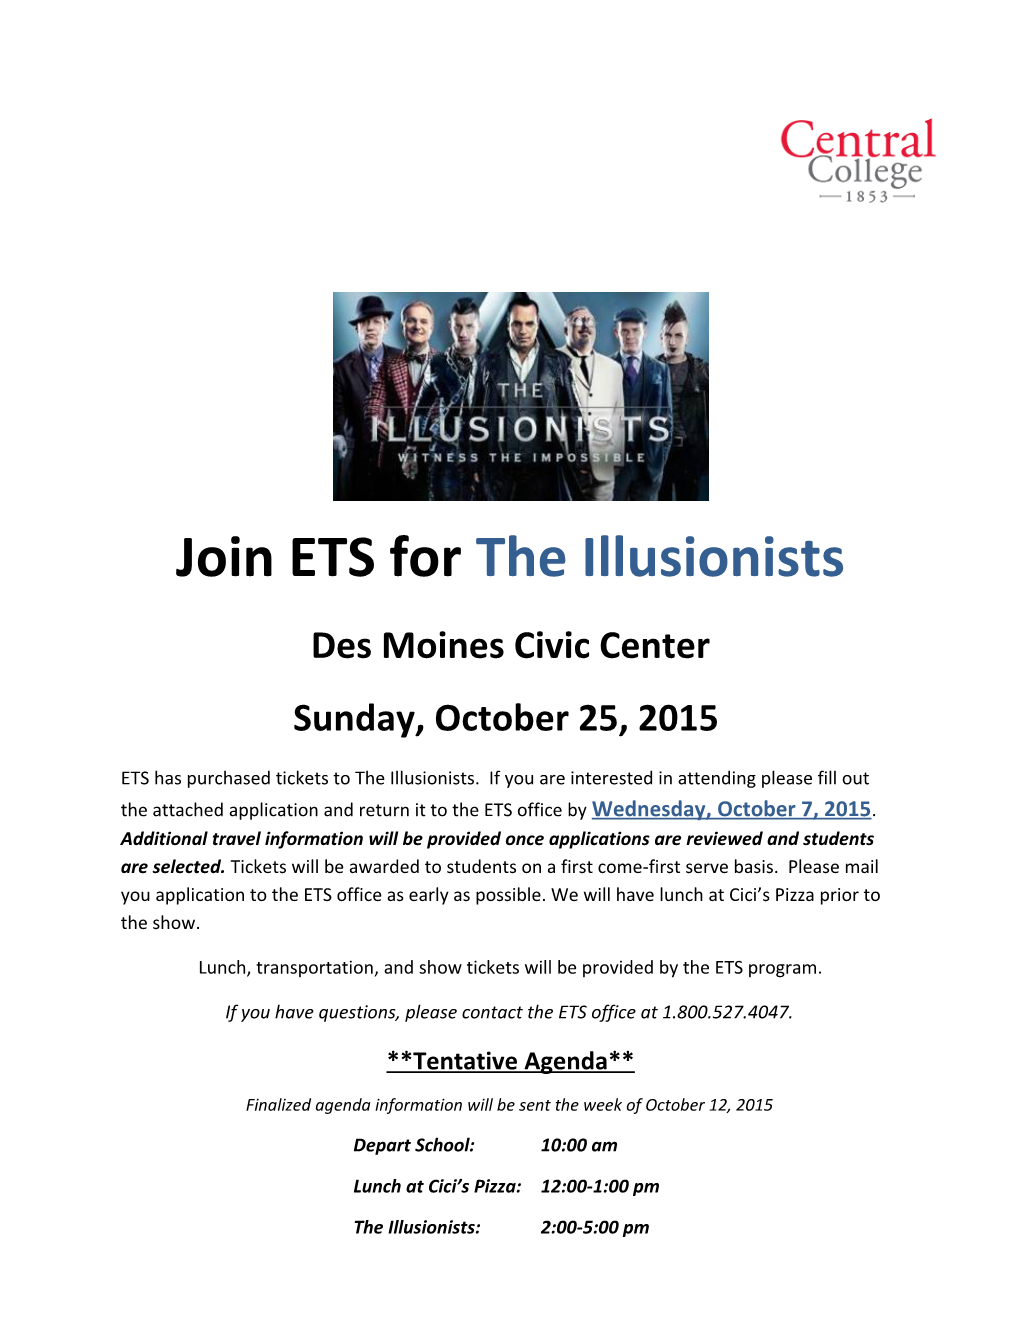 Join ETS for the Illusionists